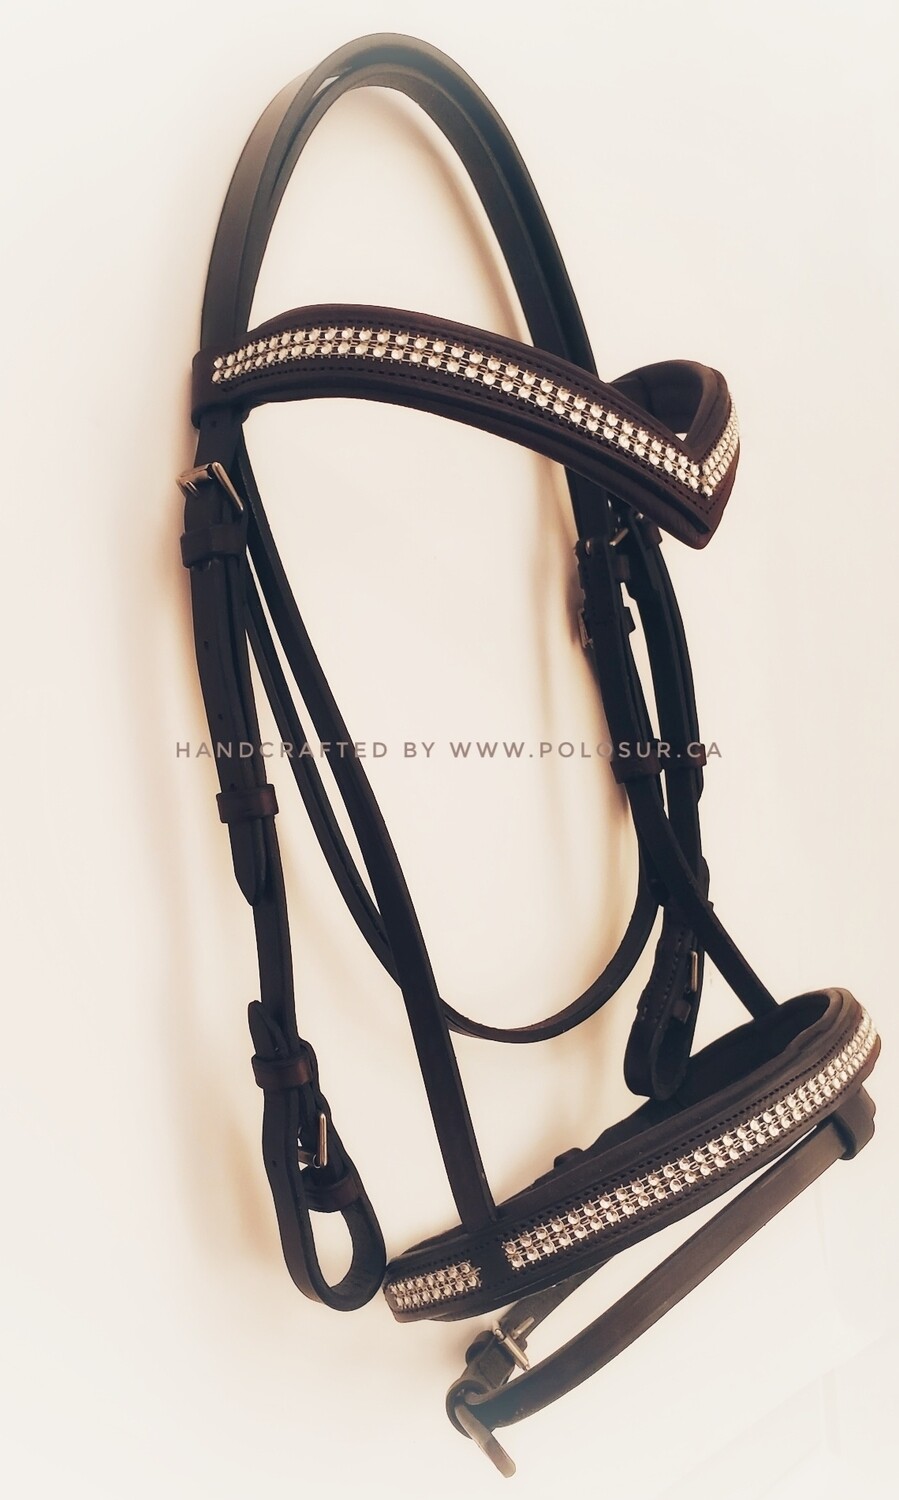 Lucy Espresso Bridle with matching reins.